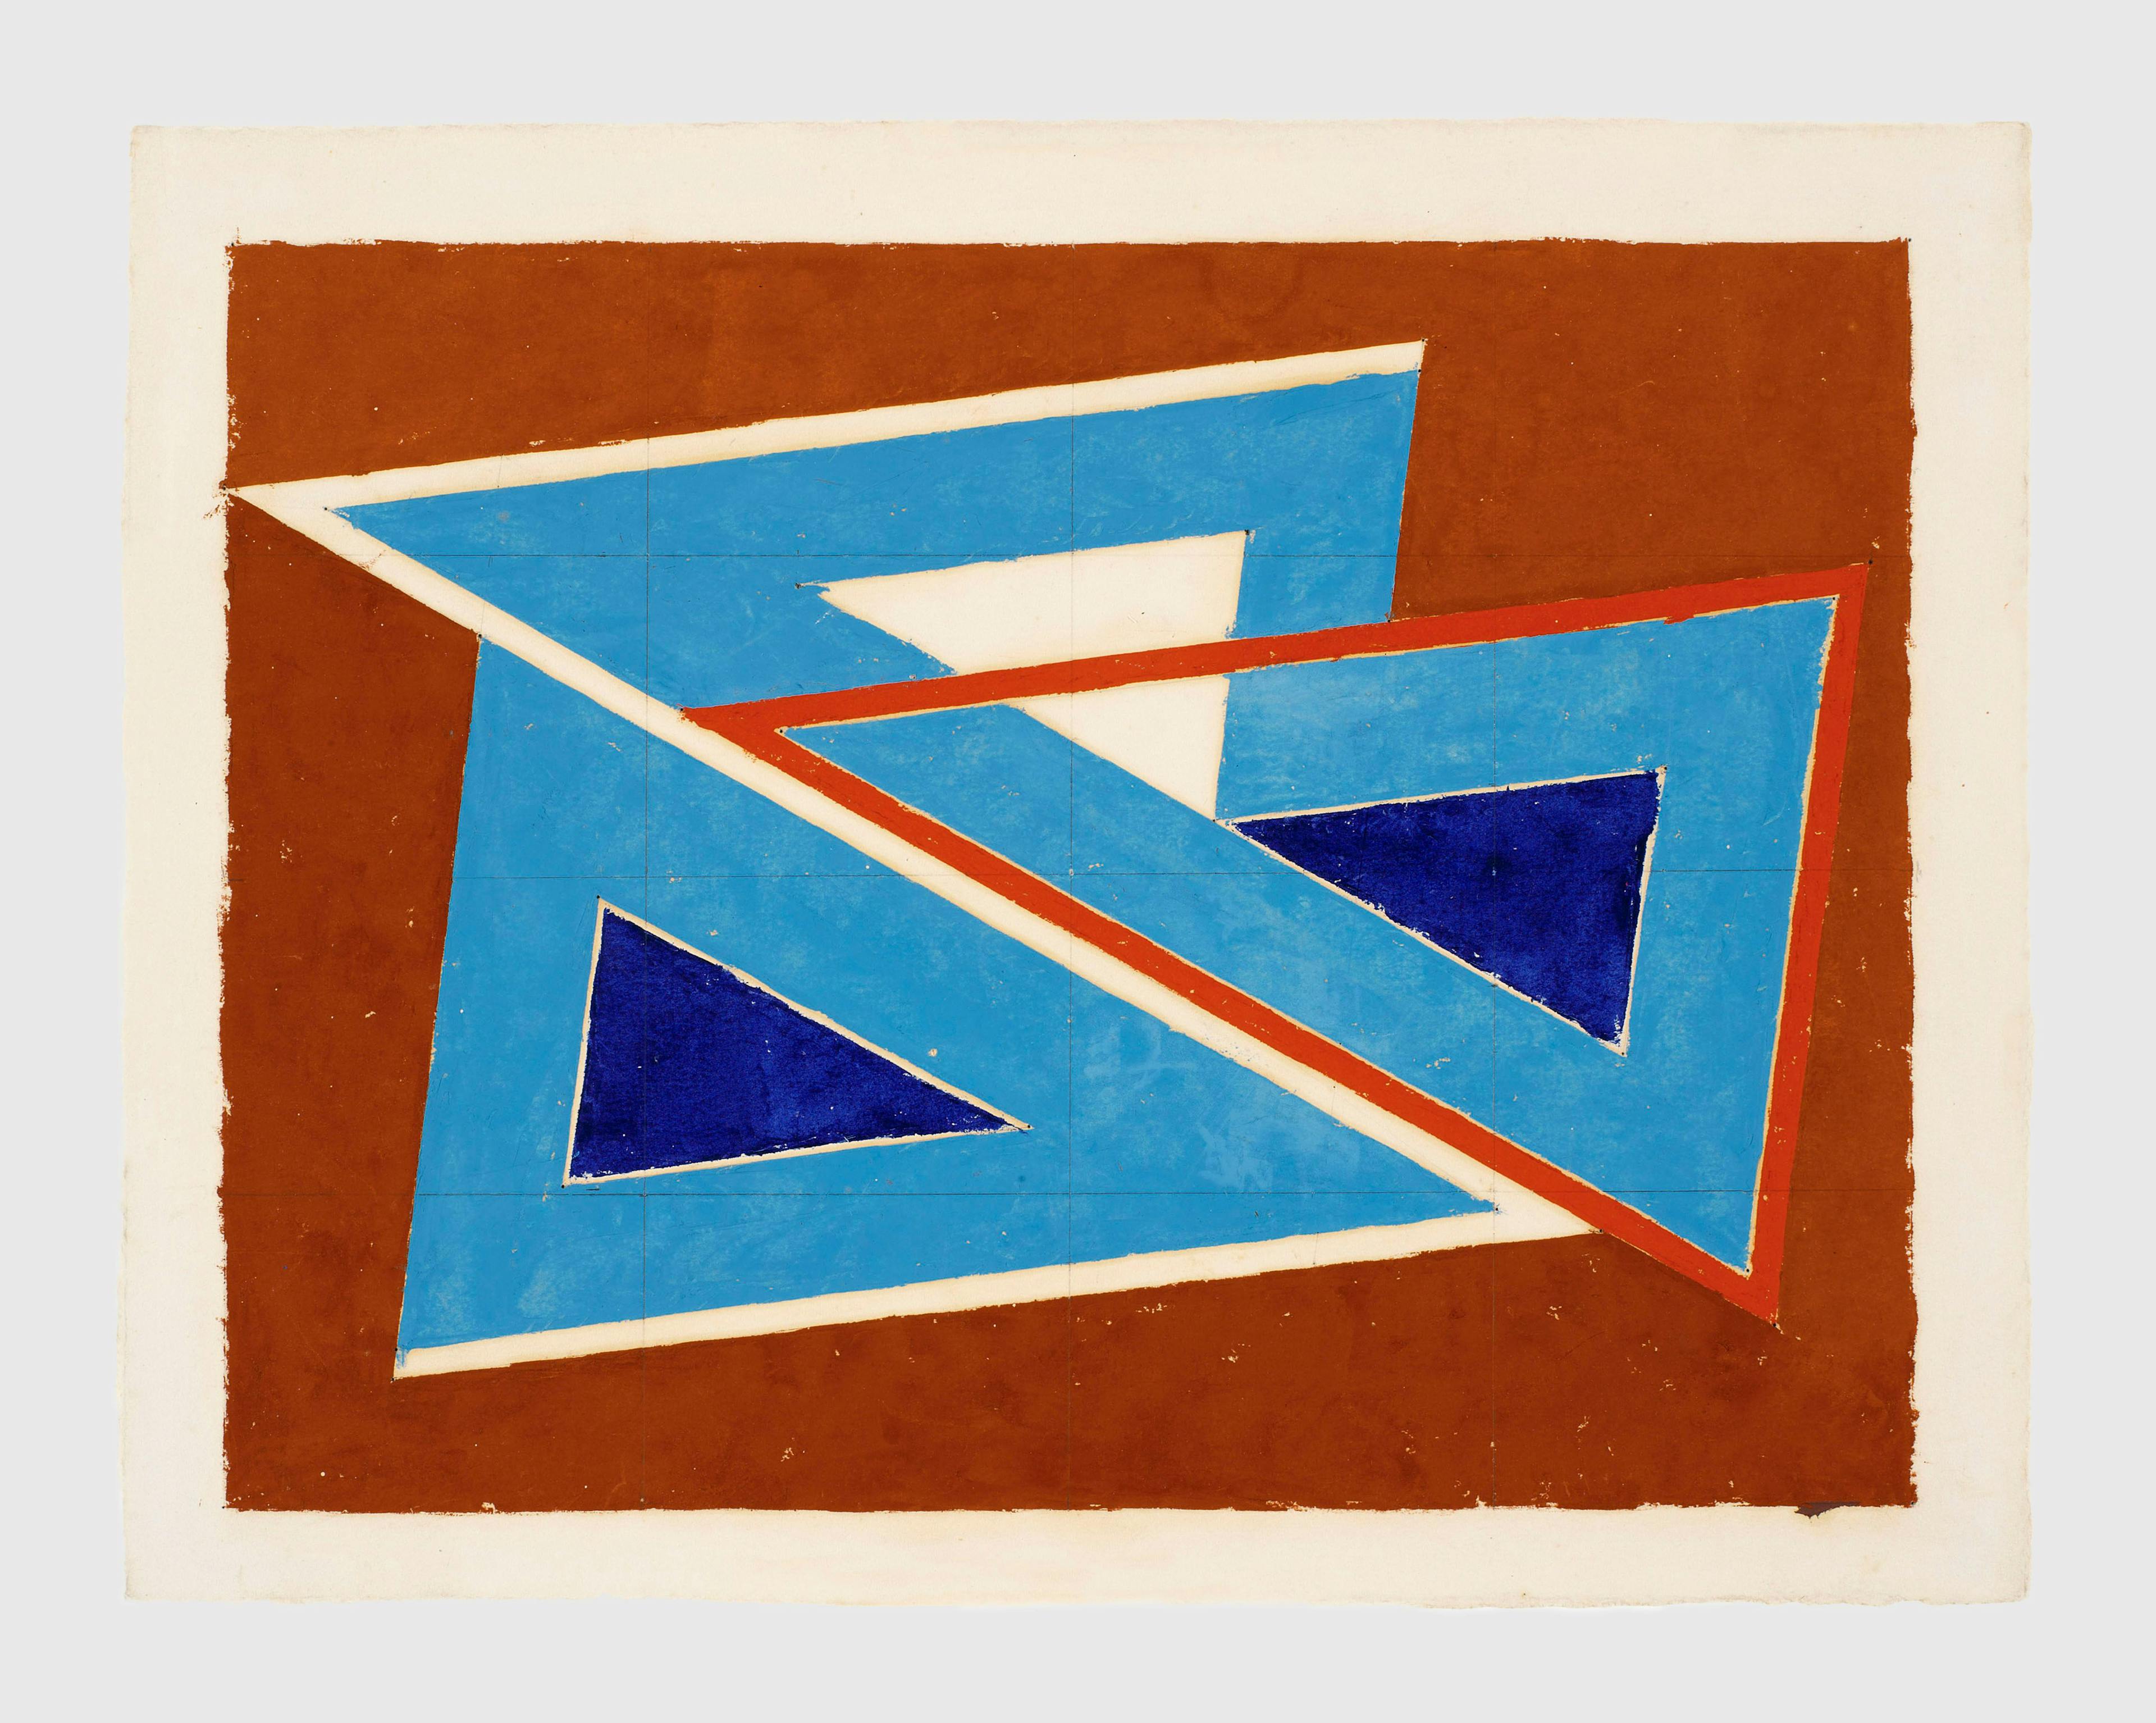 A painting by Josef Albers, called Untitled Abstraction (Blue Triangles), circa 1938.